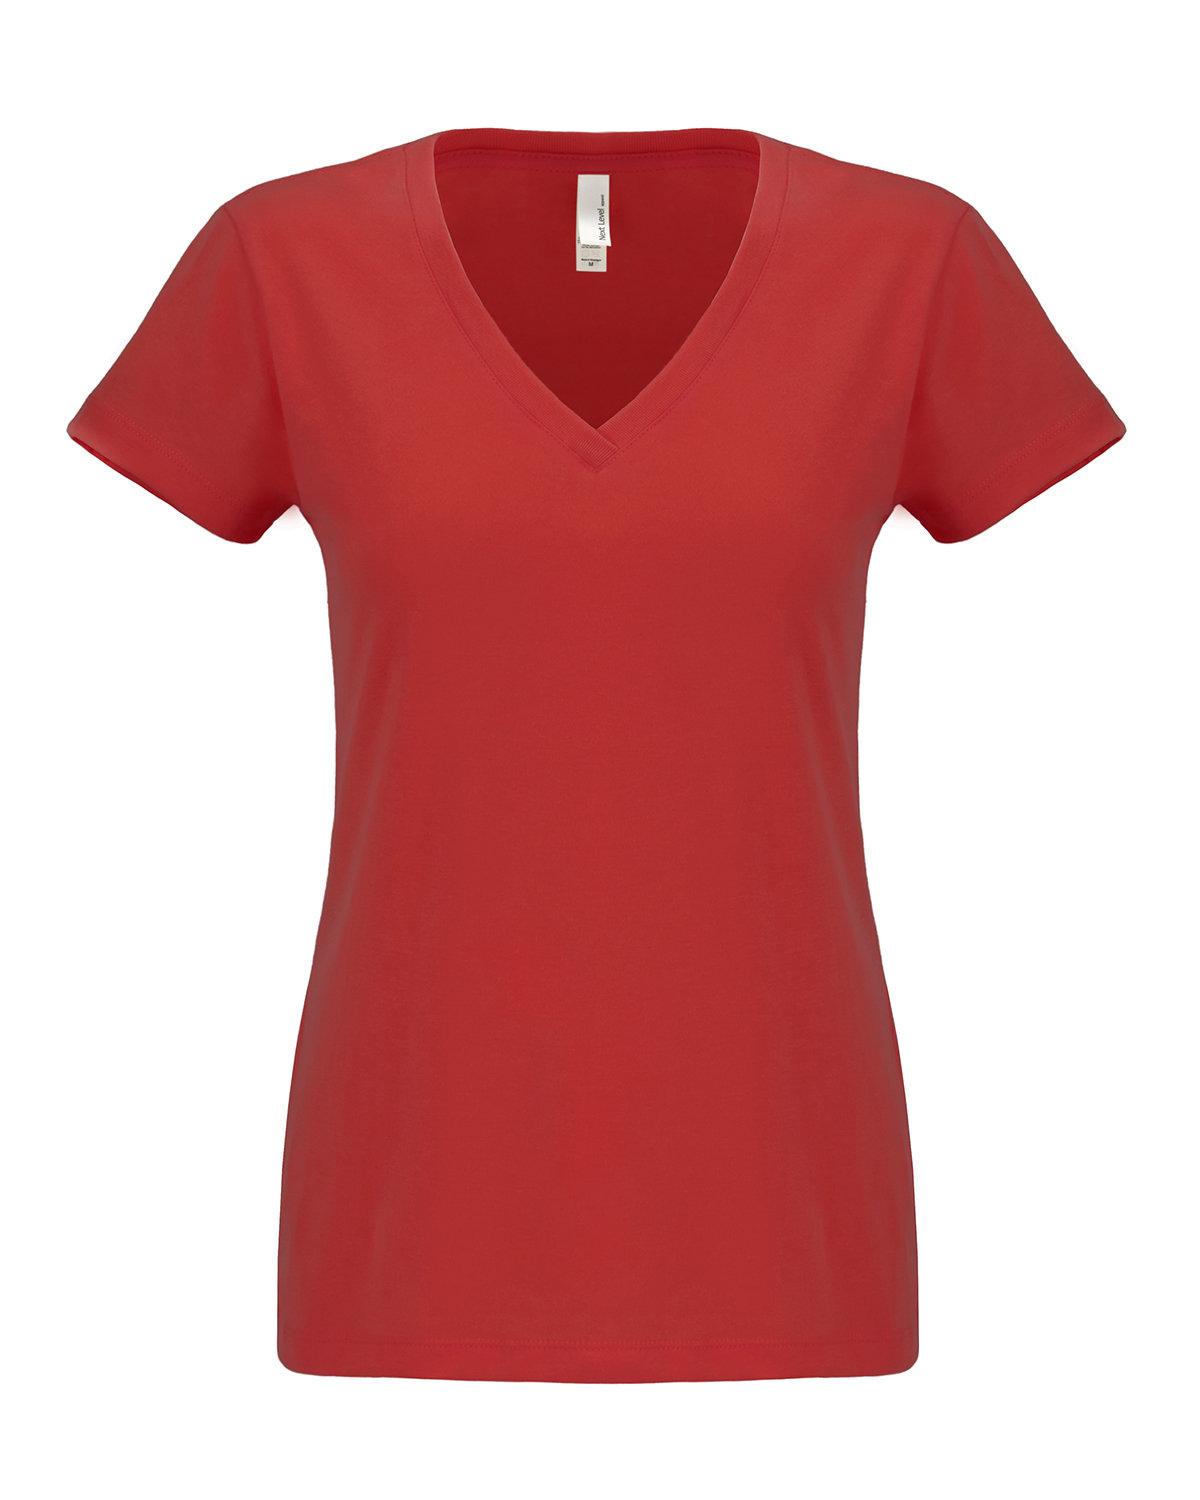 Next Level Ladies' Sueded V-Neck T-Shirt RED 